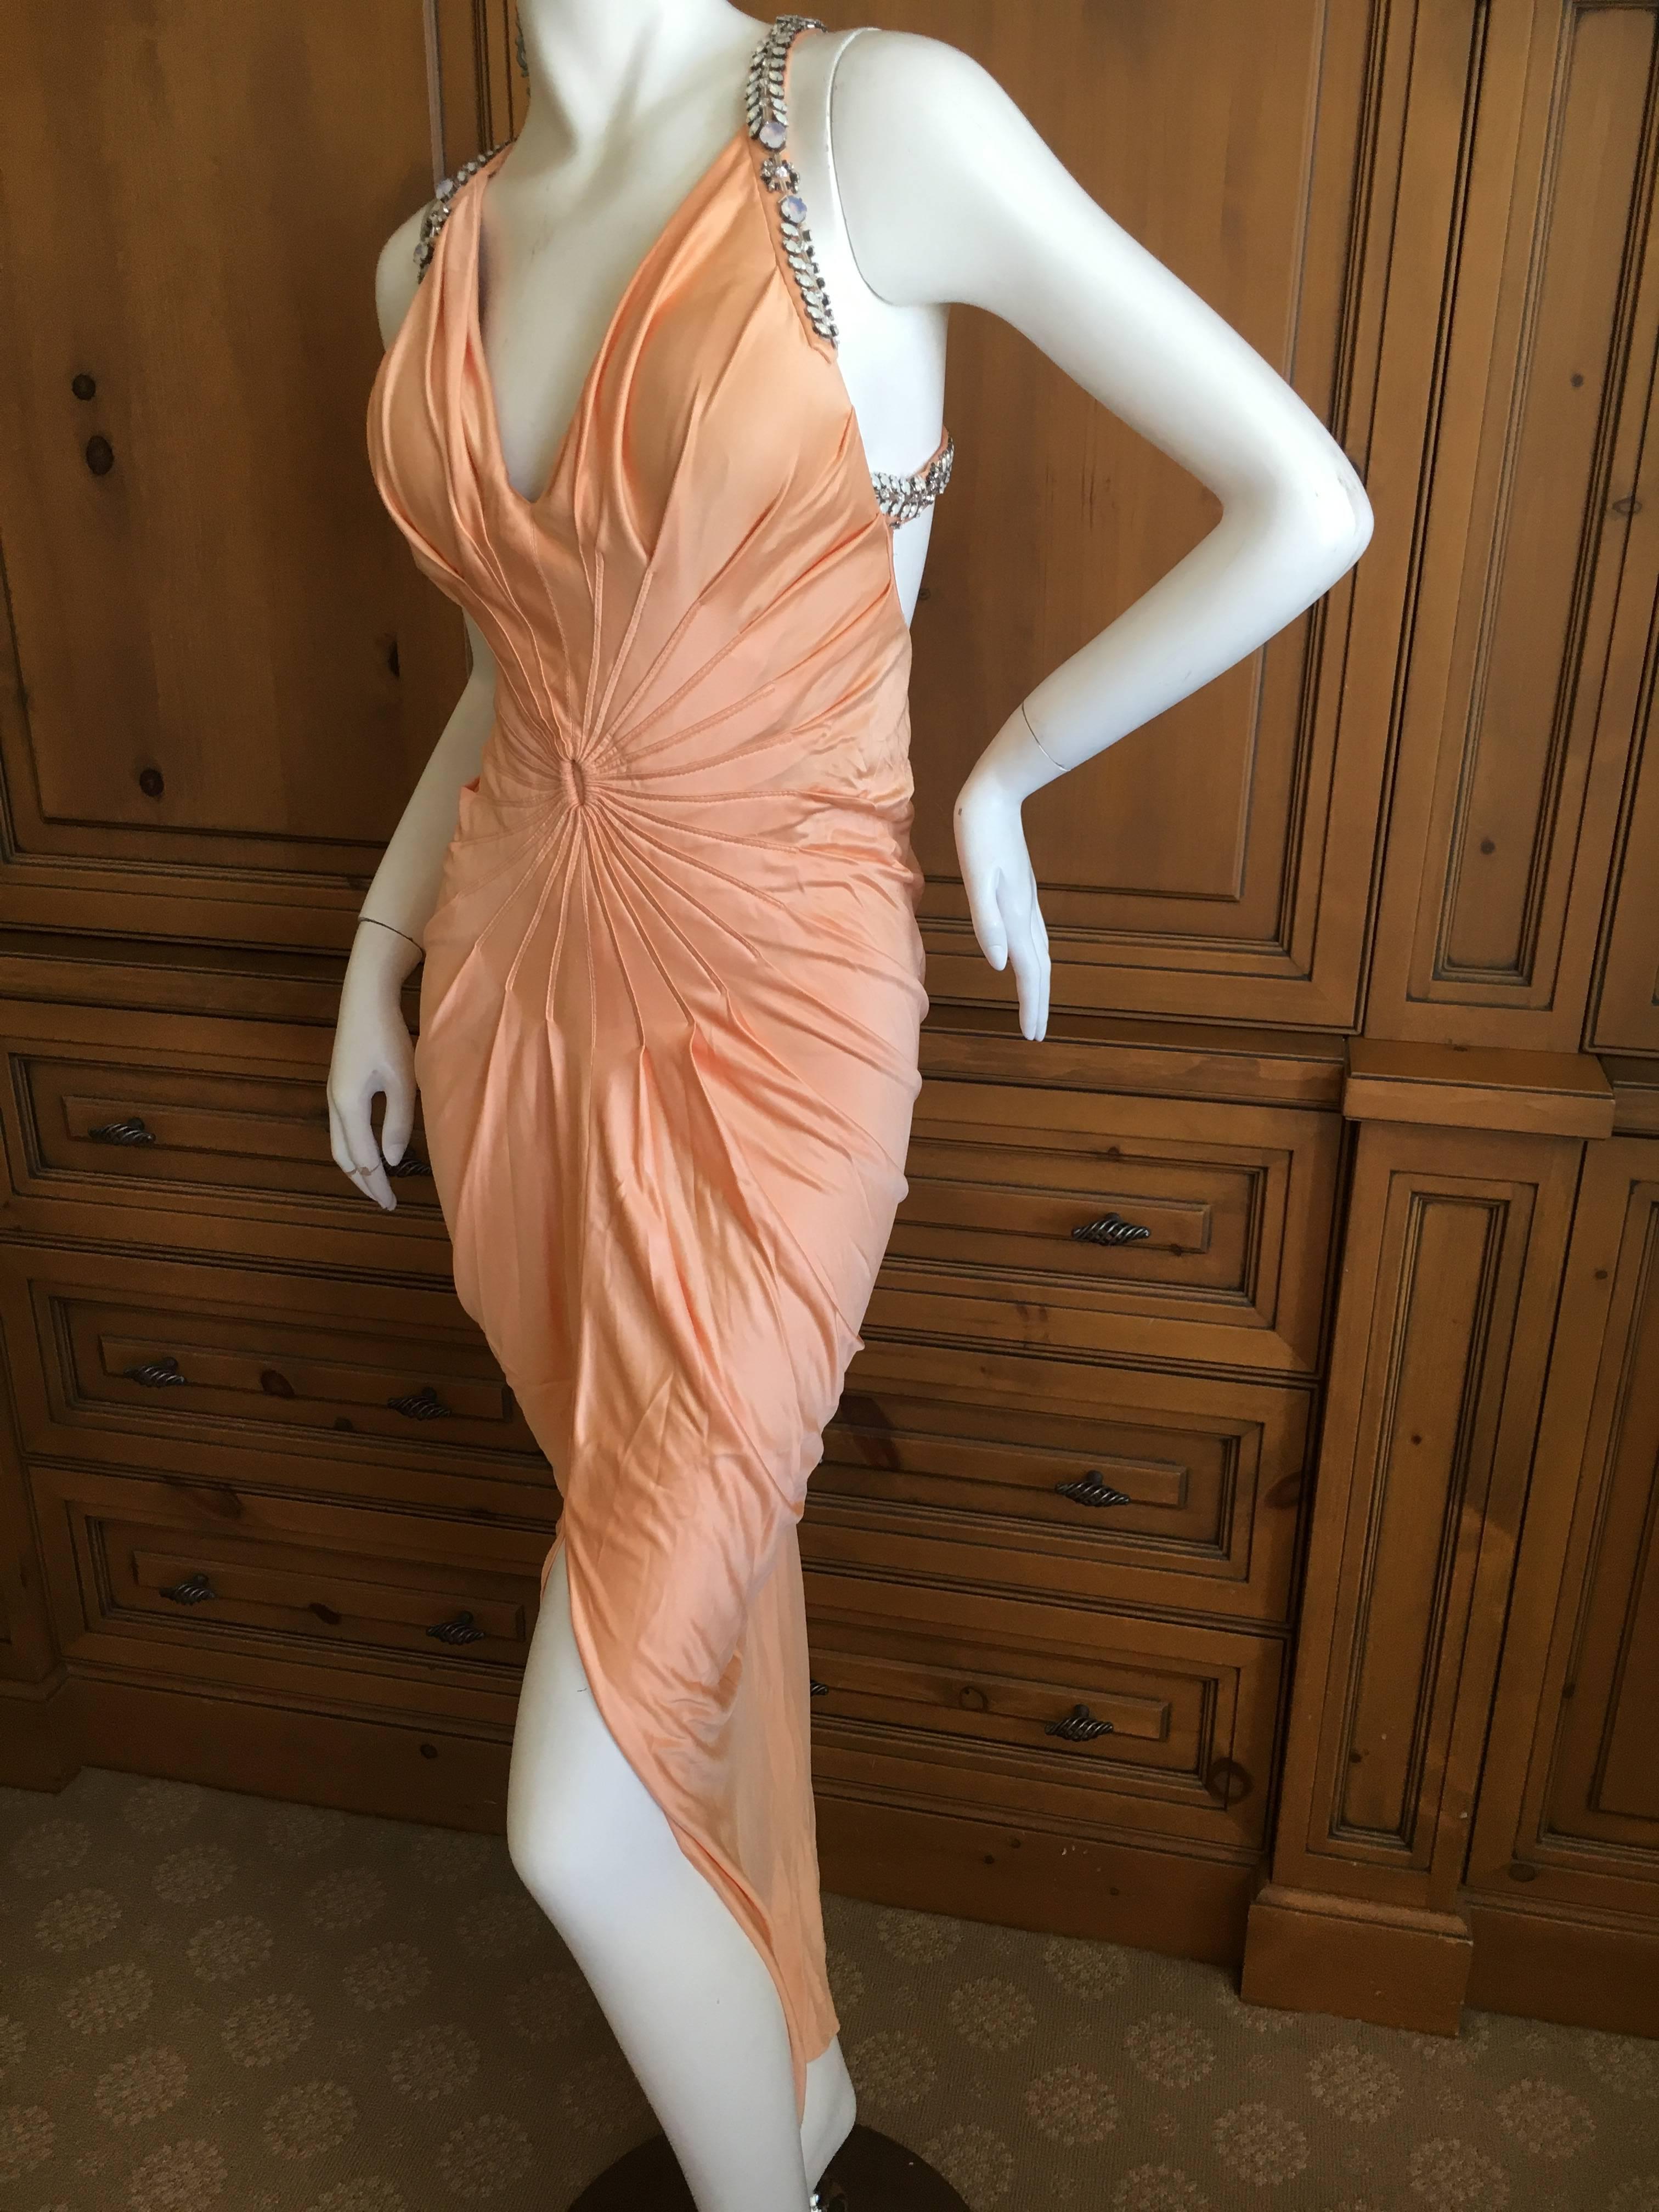 Vintage Versace Jersey Evening Dress with Cross Back Jeweled Straps.
This is much prettier in person, the jewels are very eye catching.
There are foam cups sewn in to this, they can easily be removed.
Bust 36"
Waist 26"
Hips